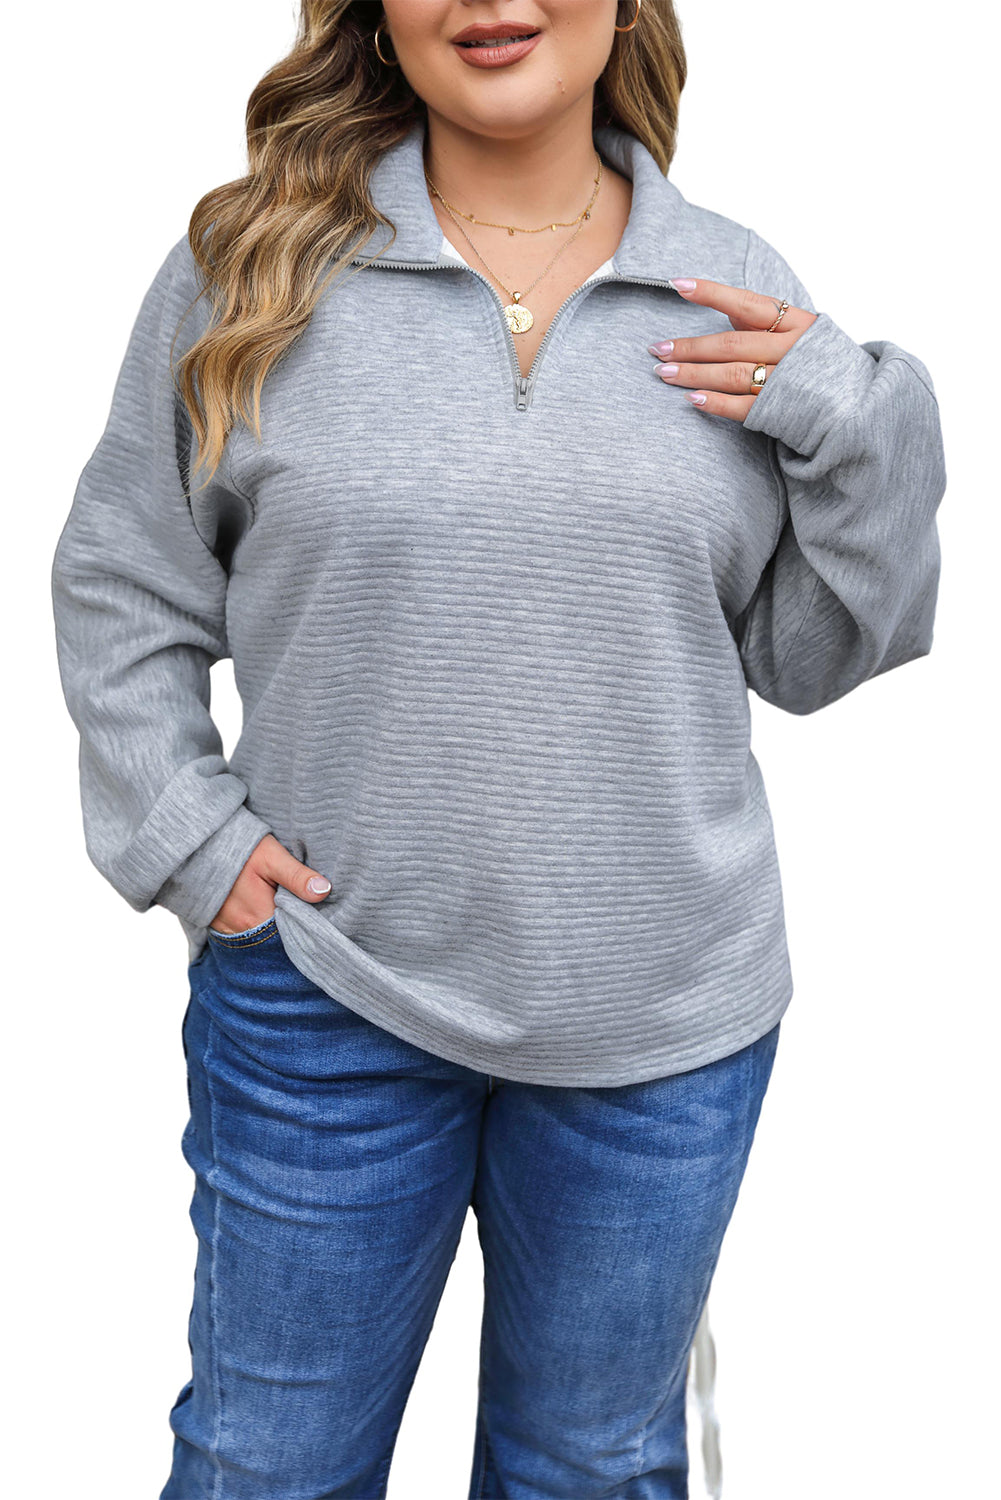 Light Grey Quarter Zipper Collared Ribbed Knit Plus Size Top